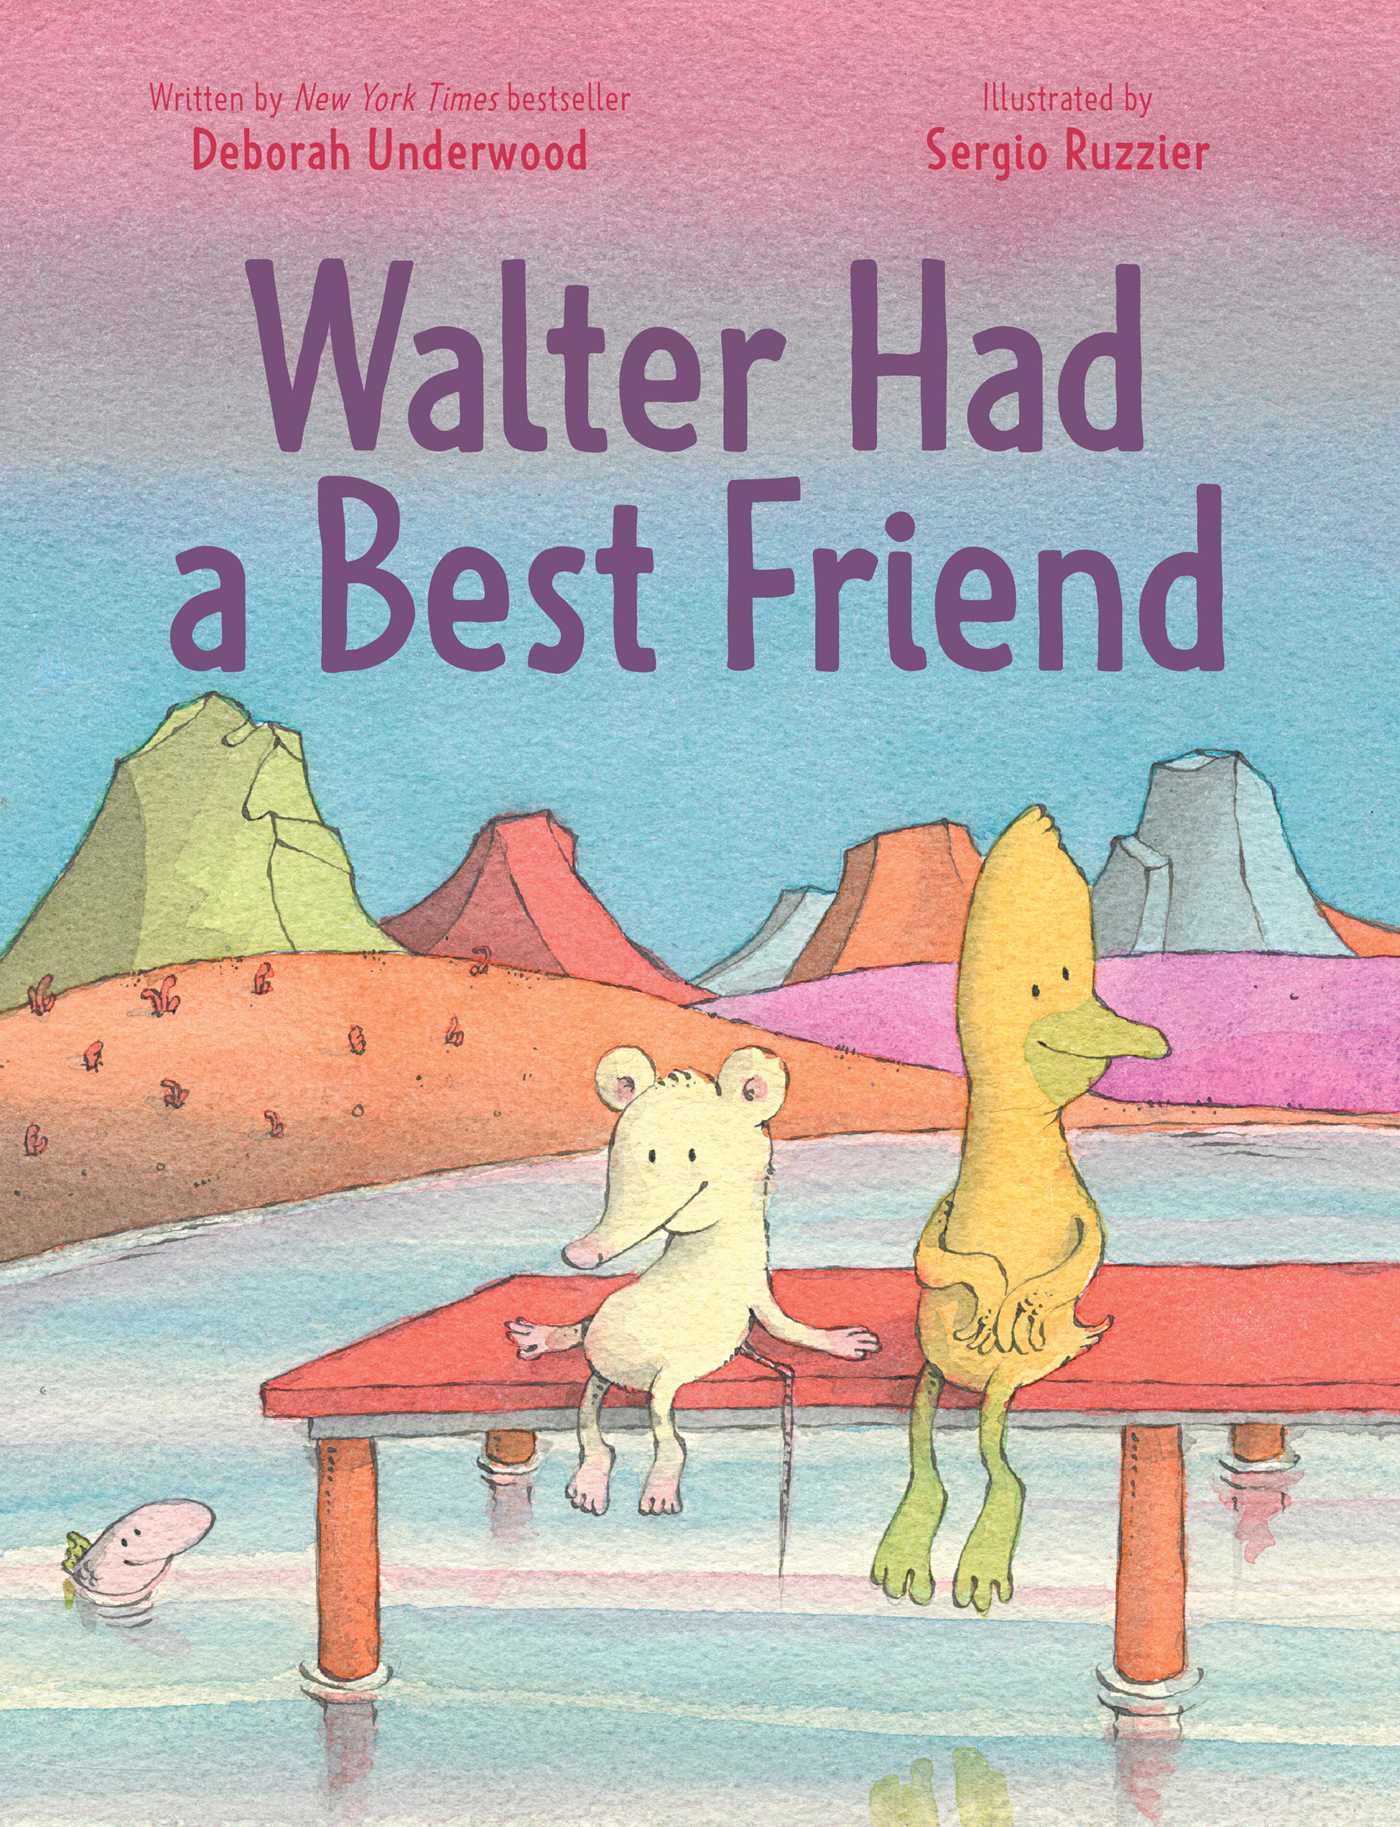 Image for "Walter Had a Best Friend"